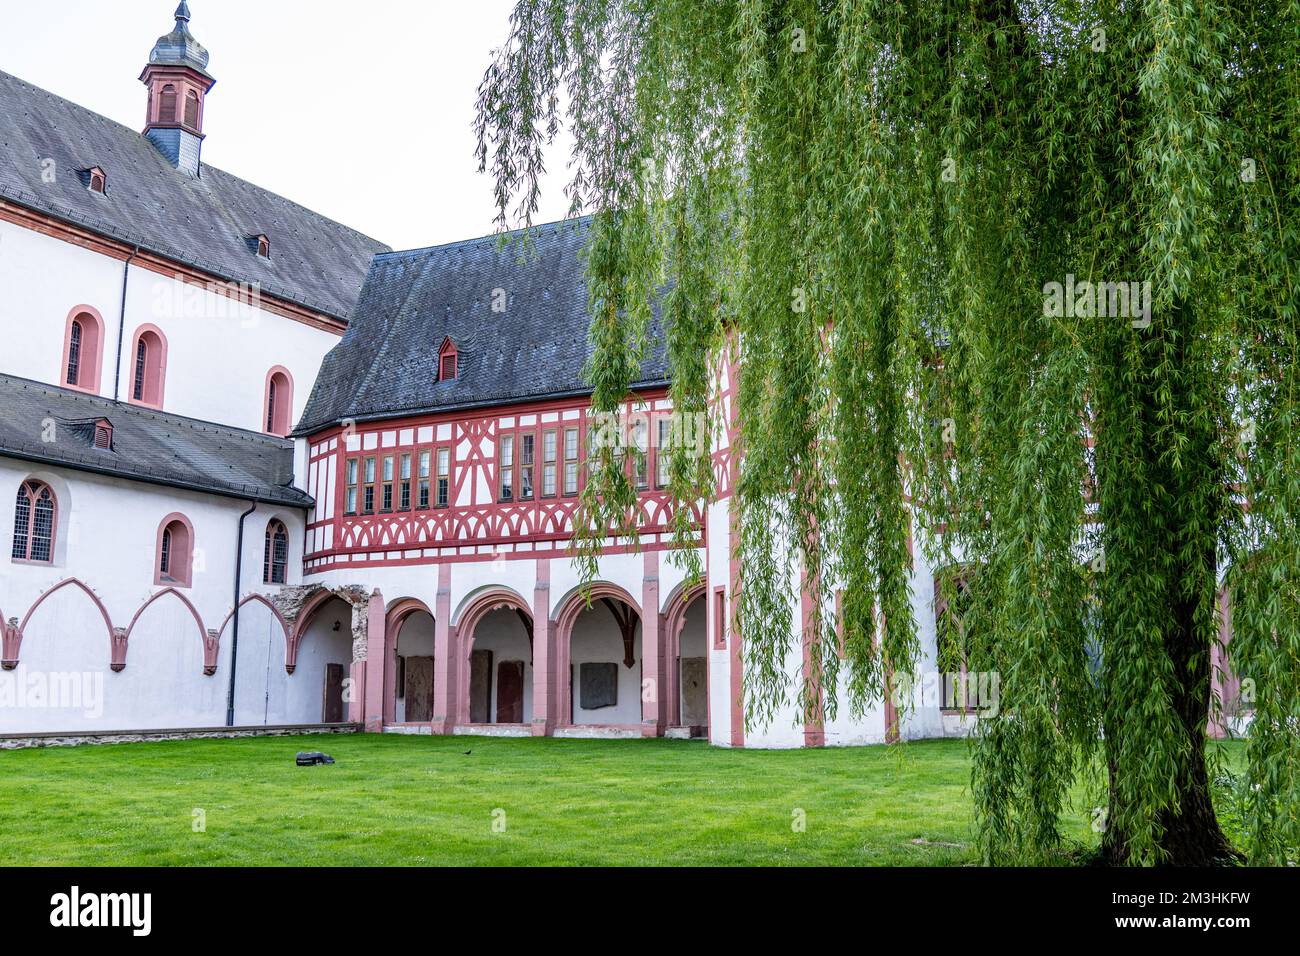 Cloisters at Eberbach Monastery in Germany Stock Photo